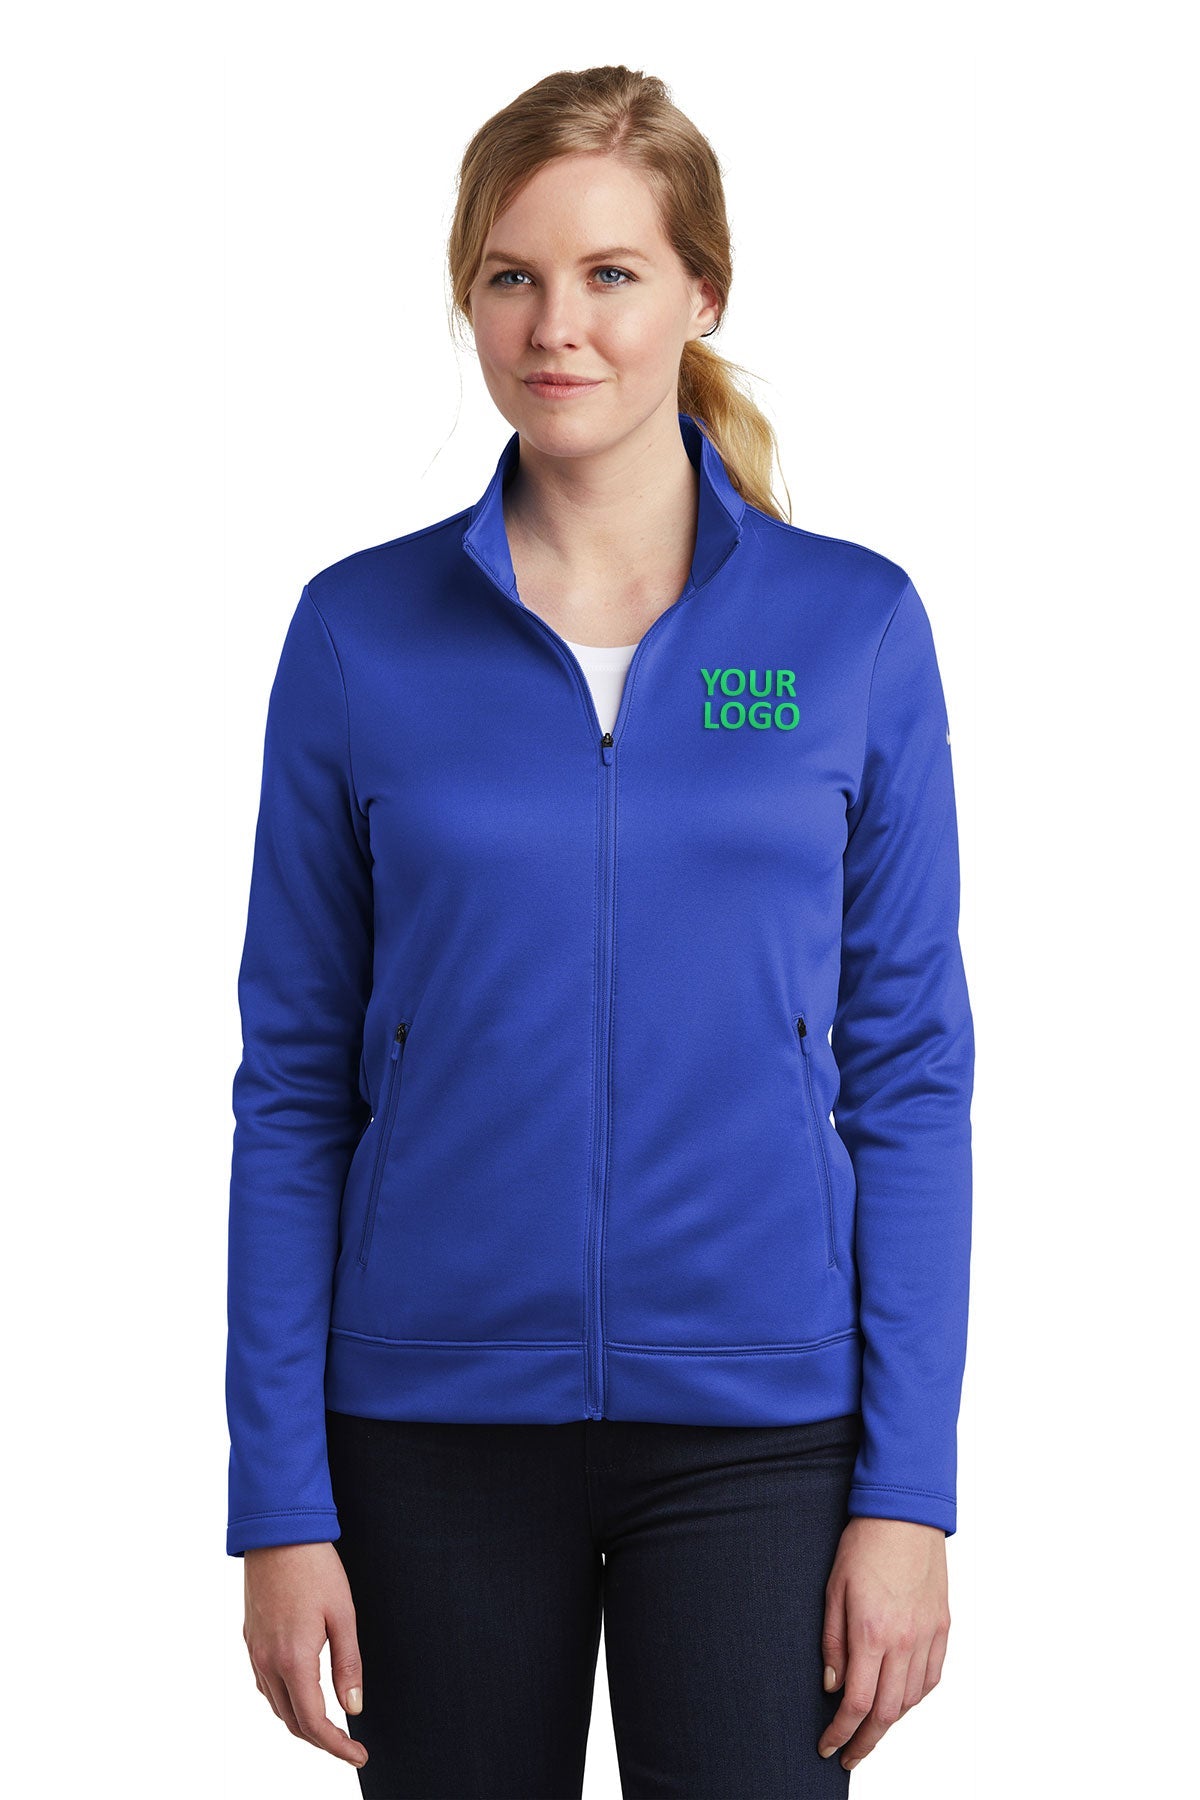 Nike Game Royal NKAH6260 embroidered jackets for business